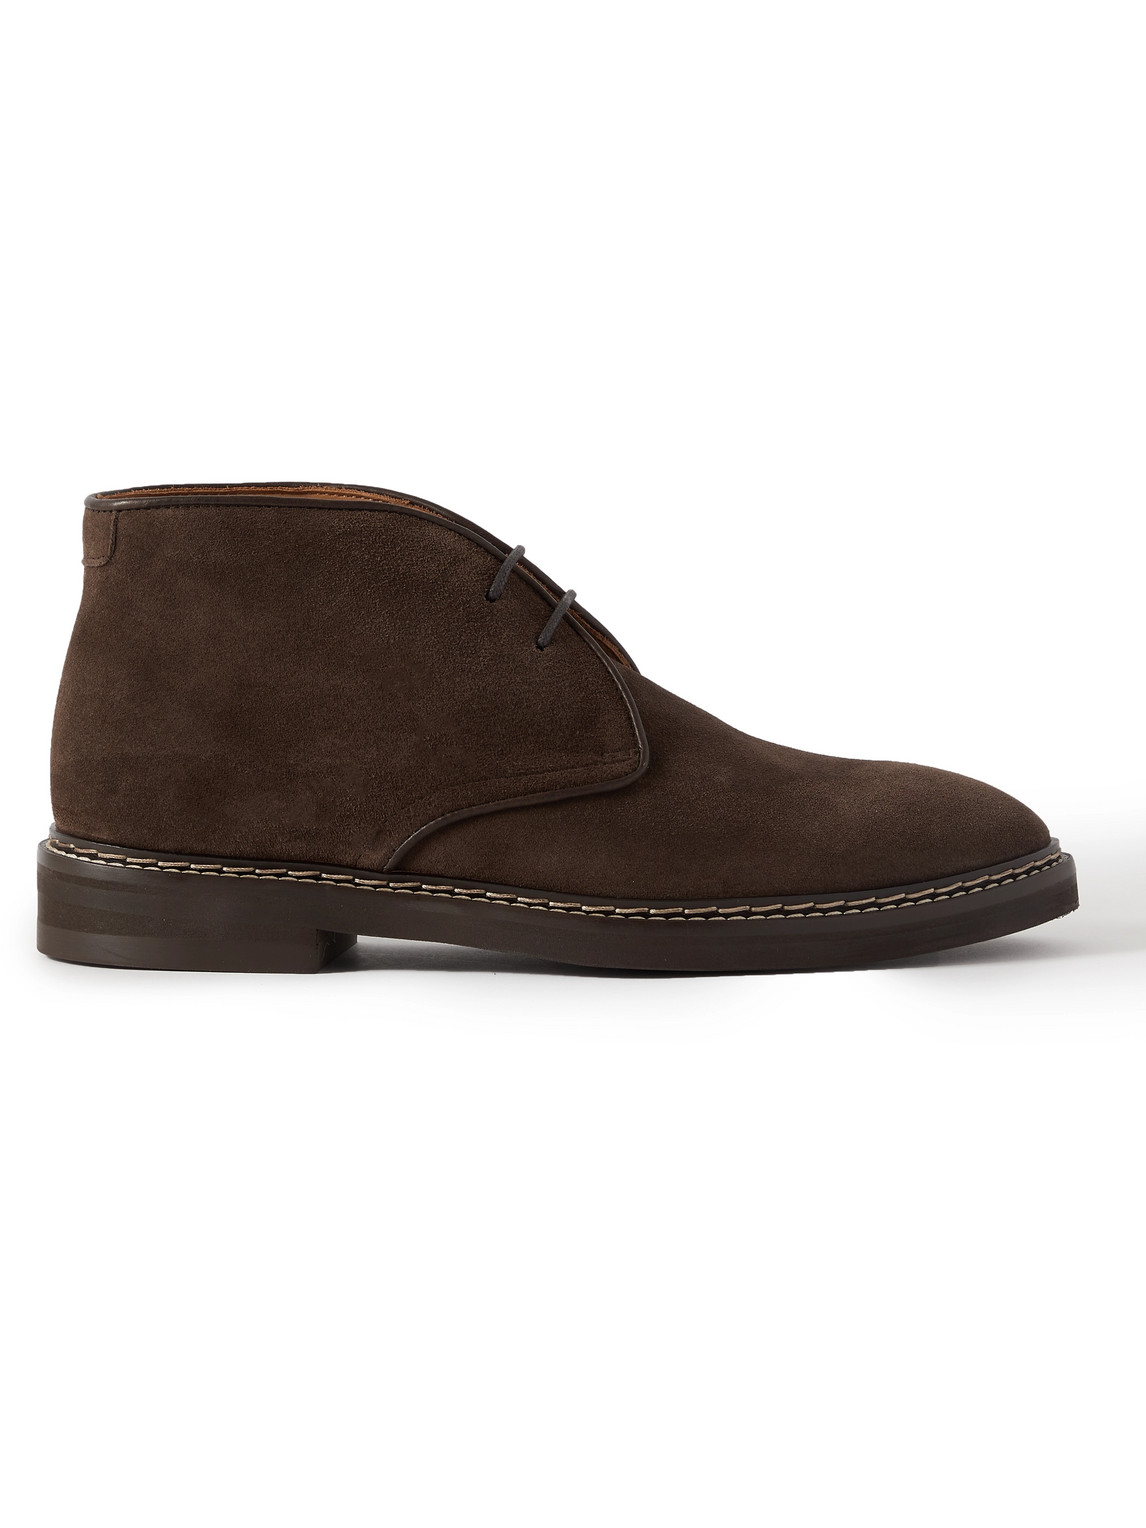 Mr P Lucien Regenerated Suede By Evolo® Desert Boots In Brown